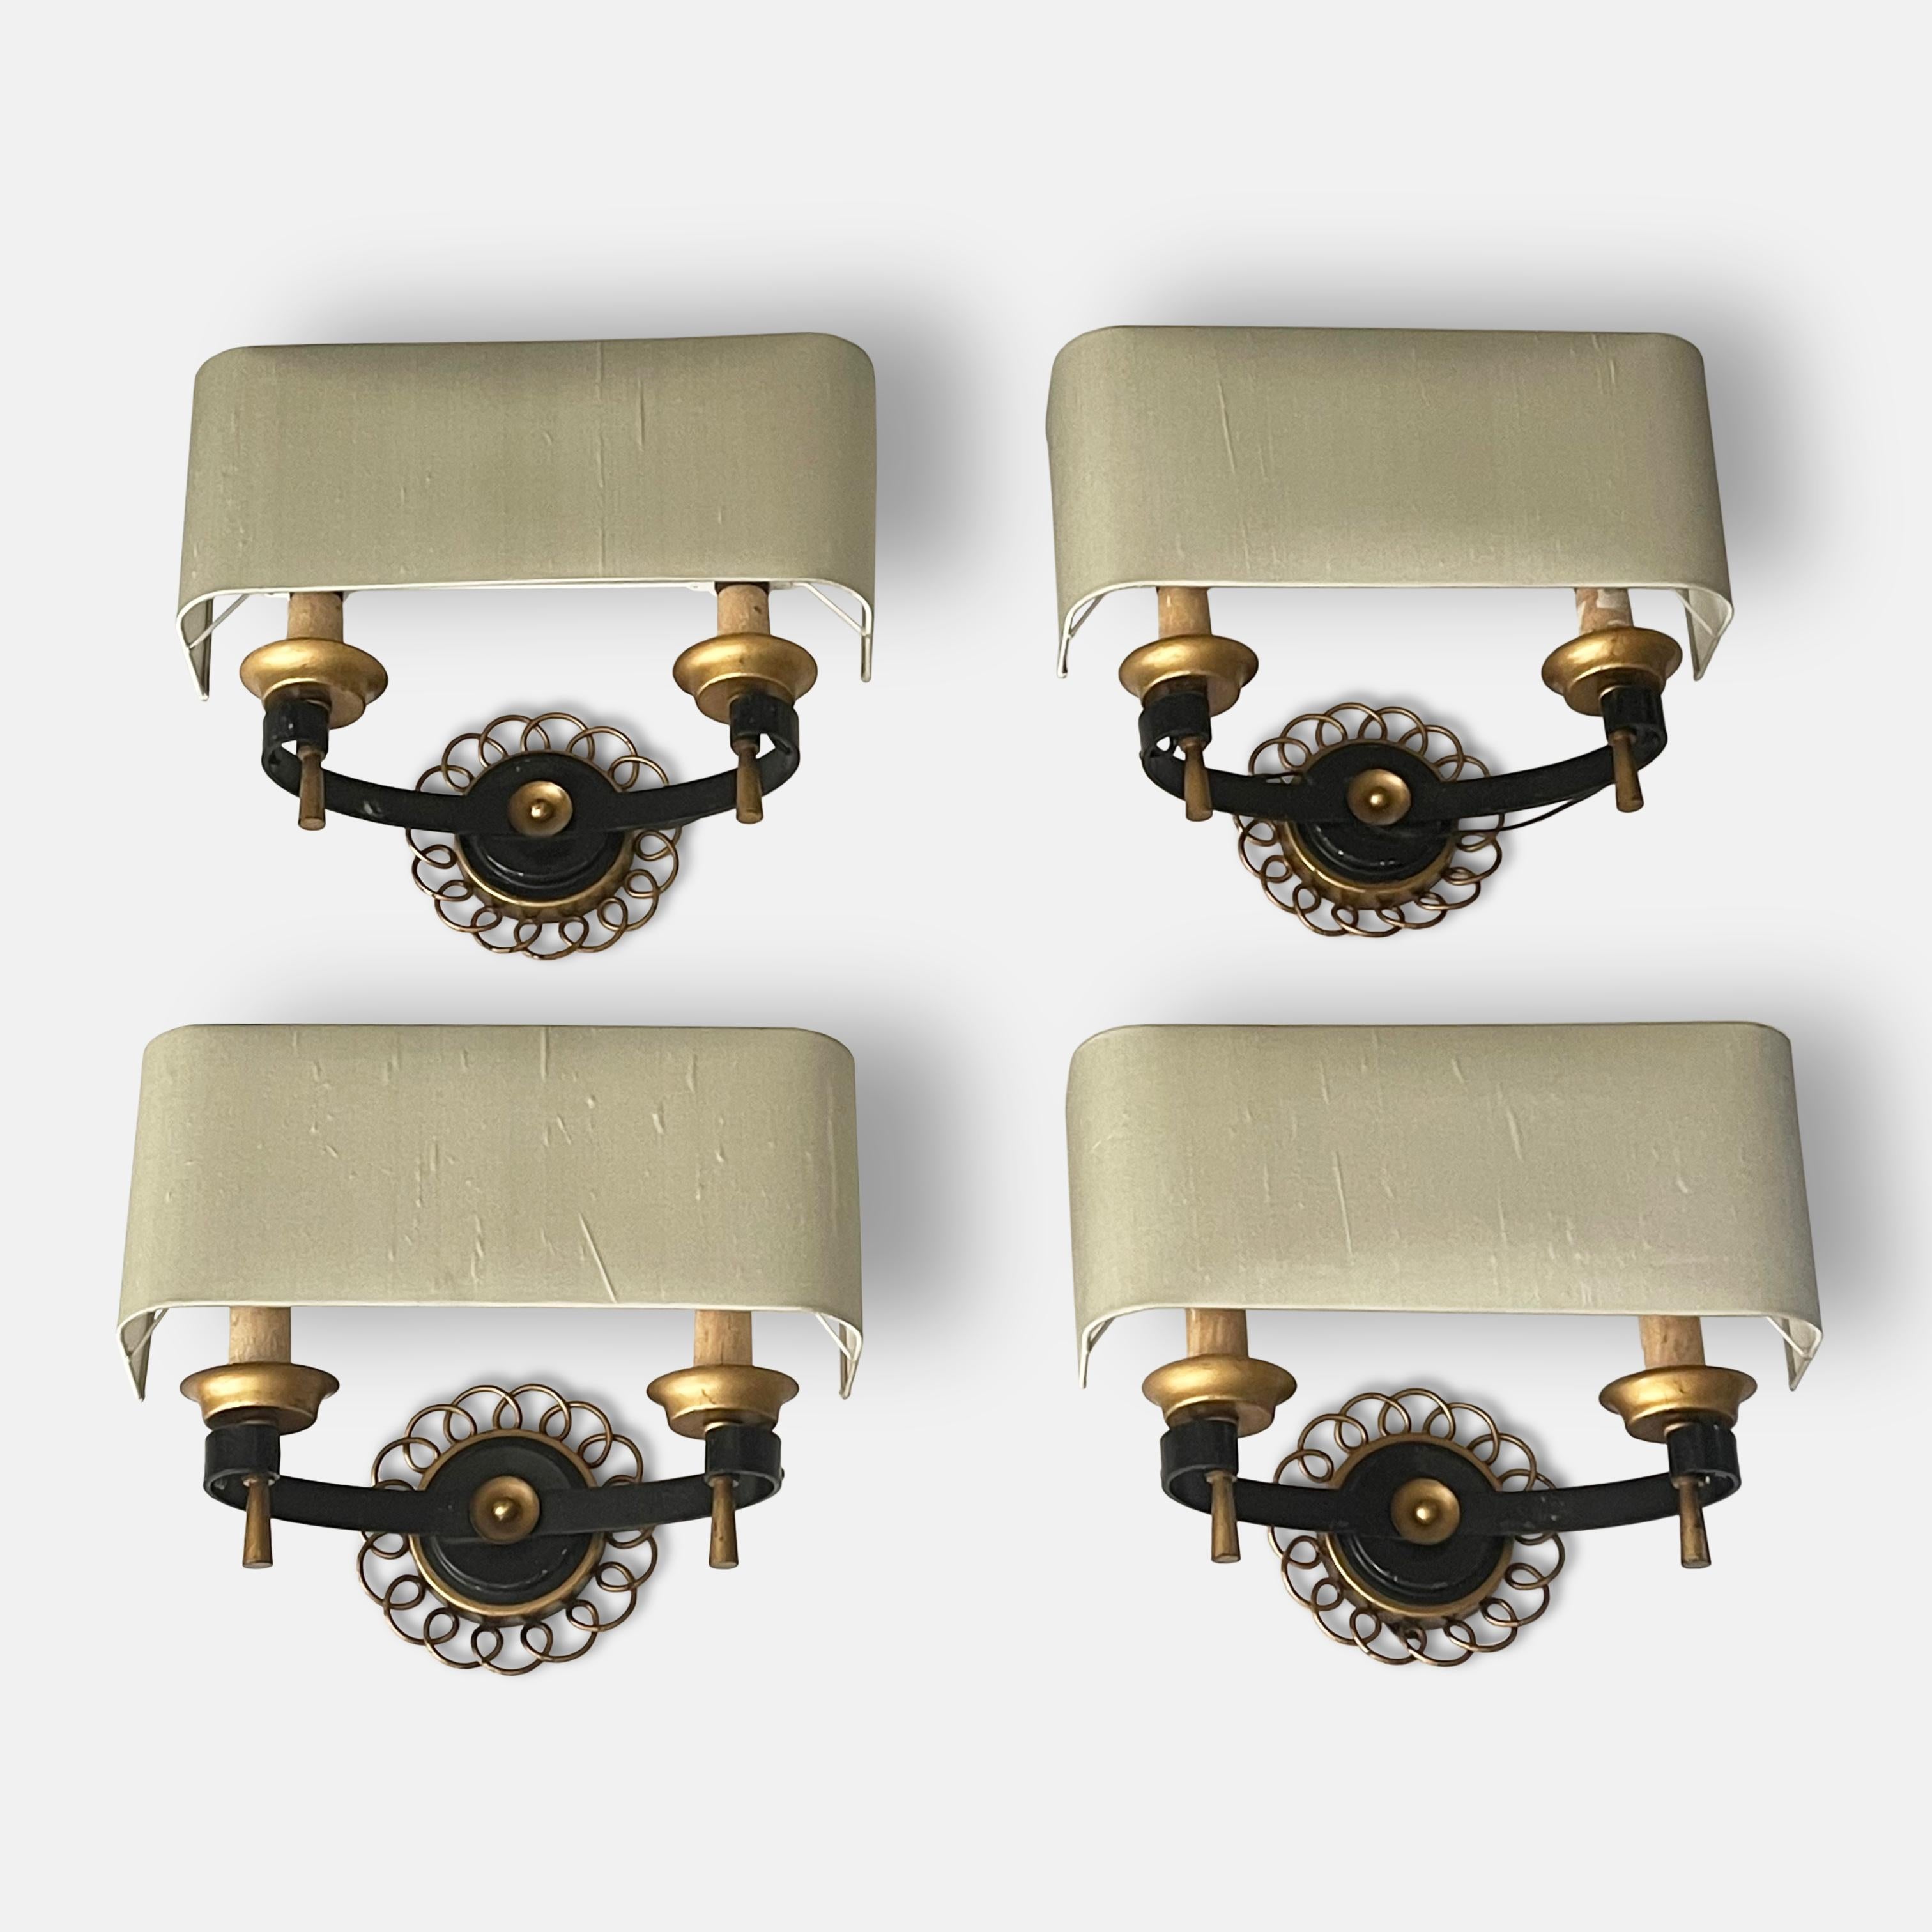 A set of four 1940s French wall lights in the style of Gilbert Poillerat.

A beautiful set of four wall lights each with a double bulb and stylish wrap around silk shades. A semi-circular arm with a scrolled end each hold a torche set off by a